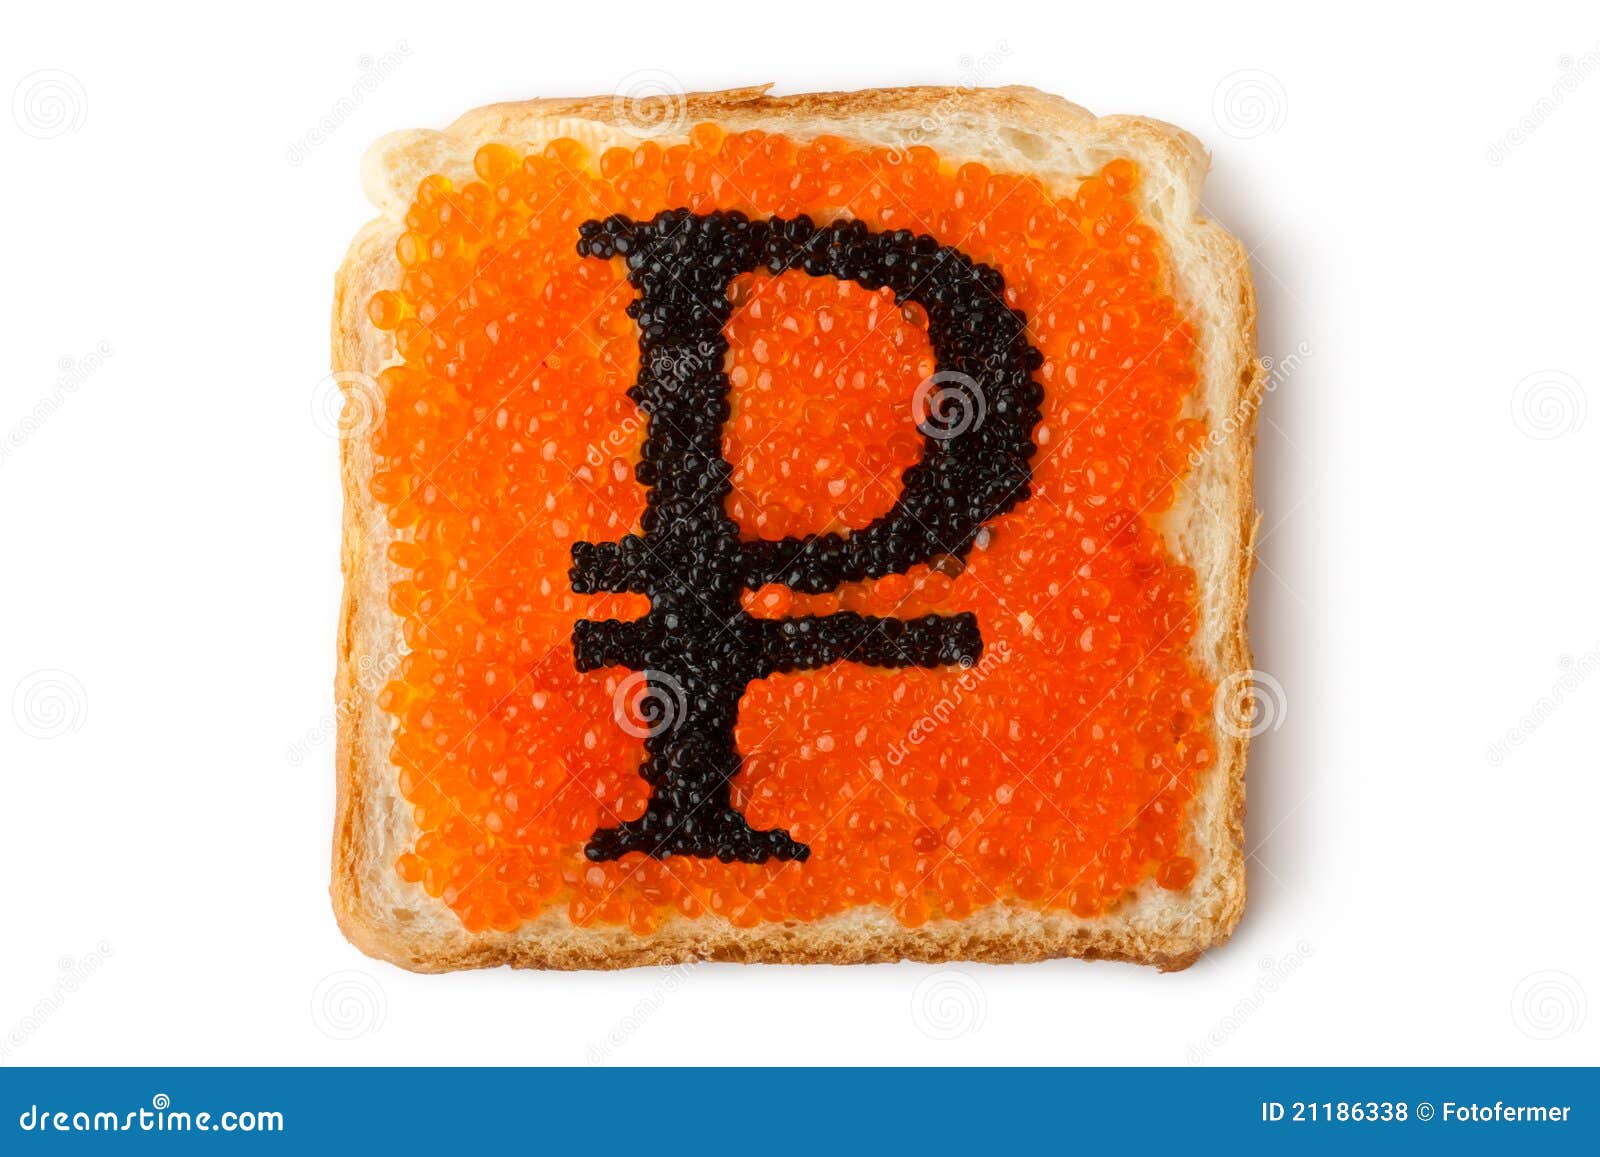 monetary russian rouble sandwich with caviar